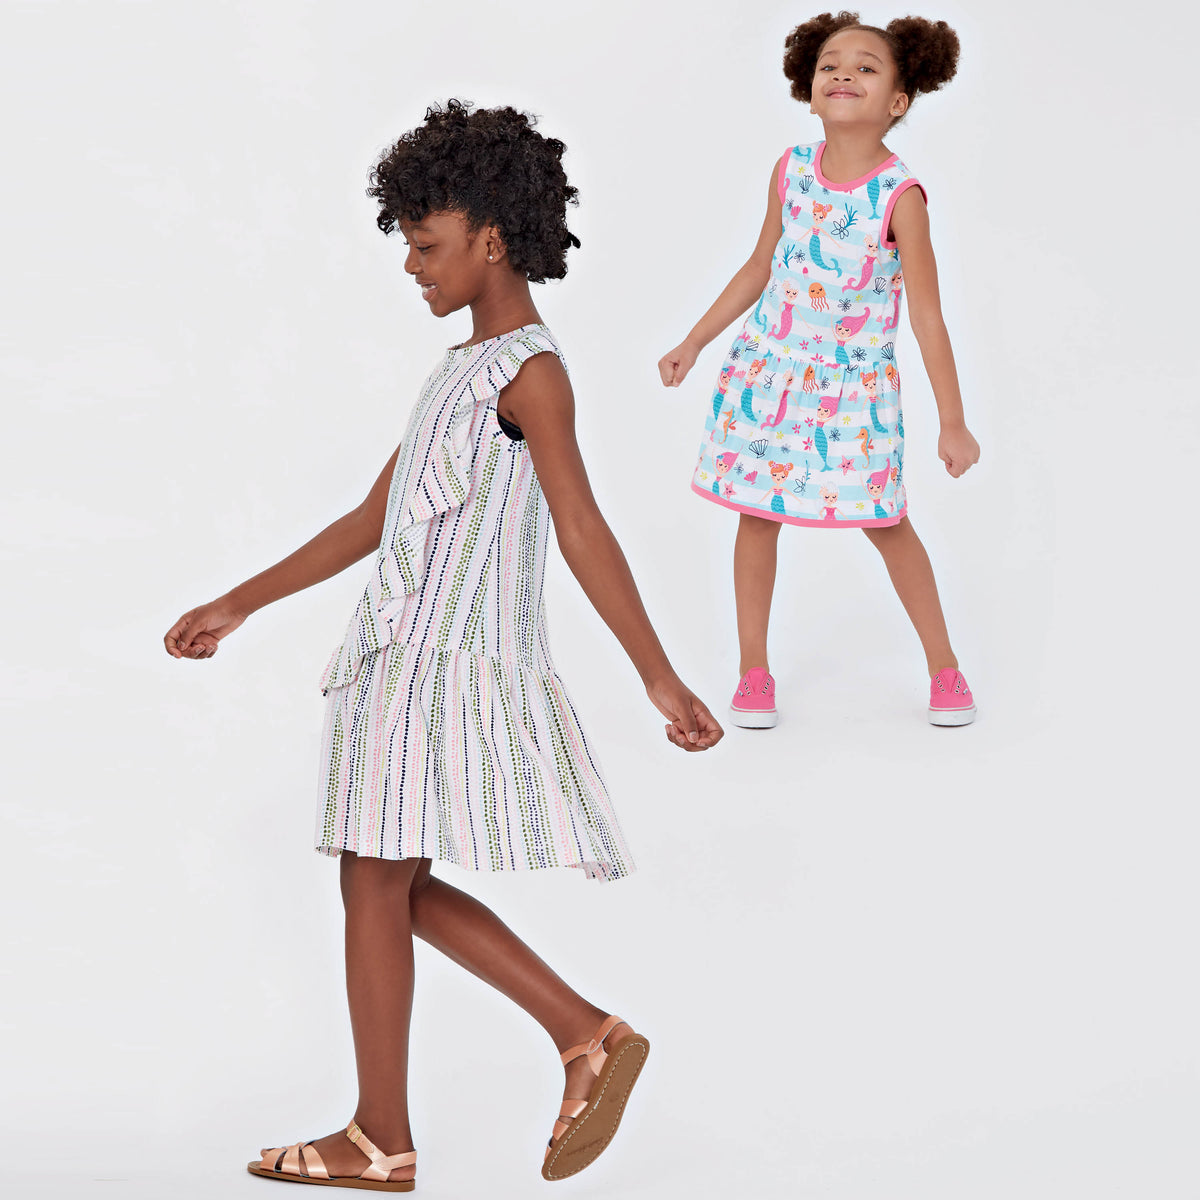 6630 New Look Sewing Pattern N6630 Children's And Girls' Dresses